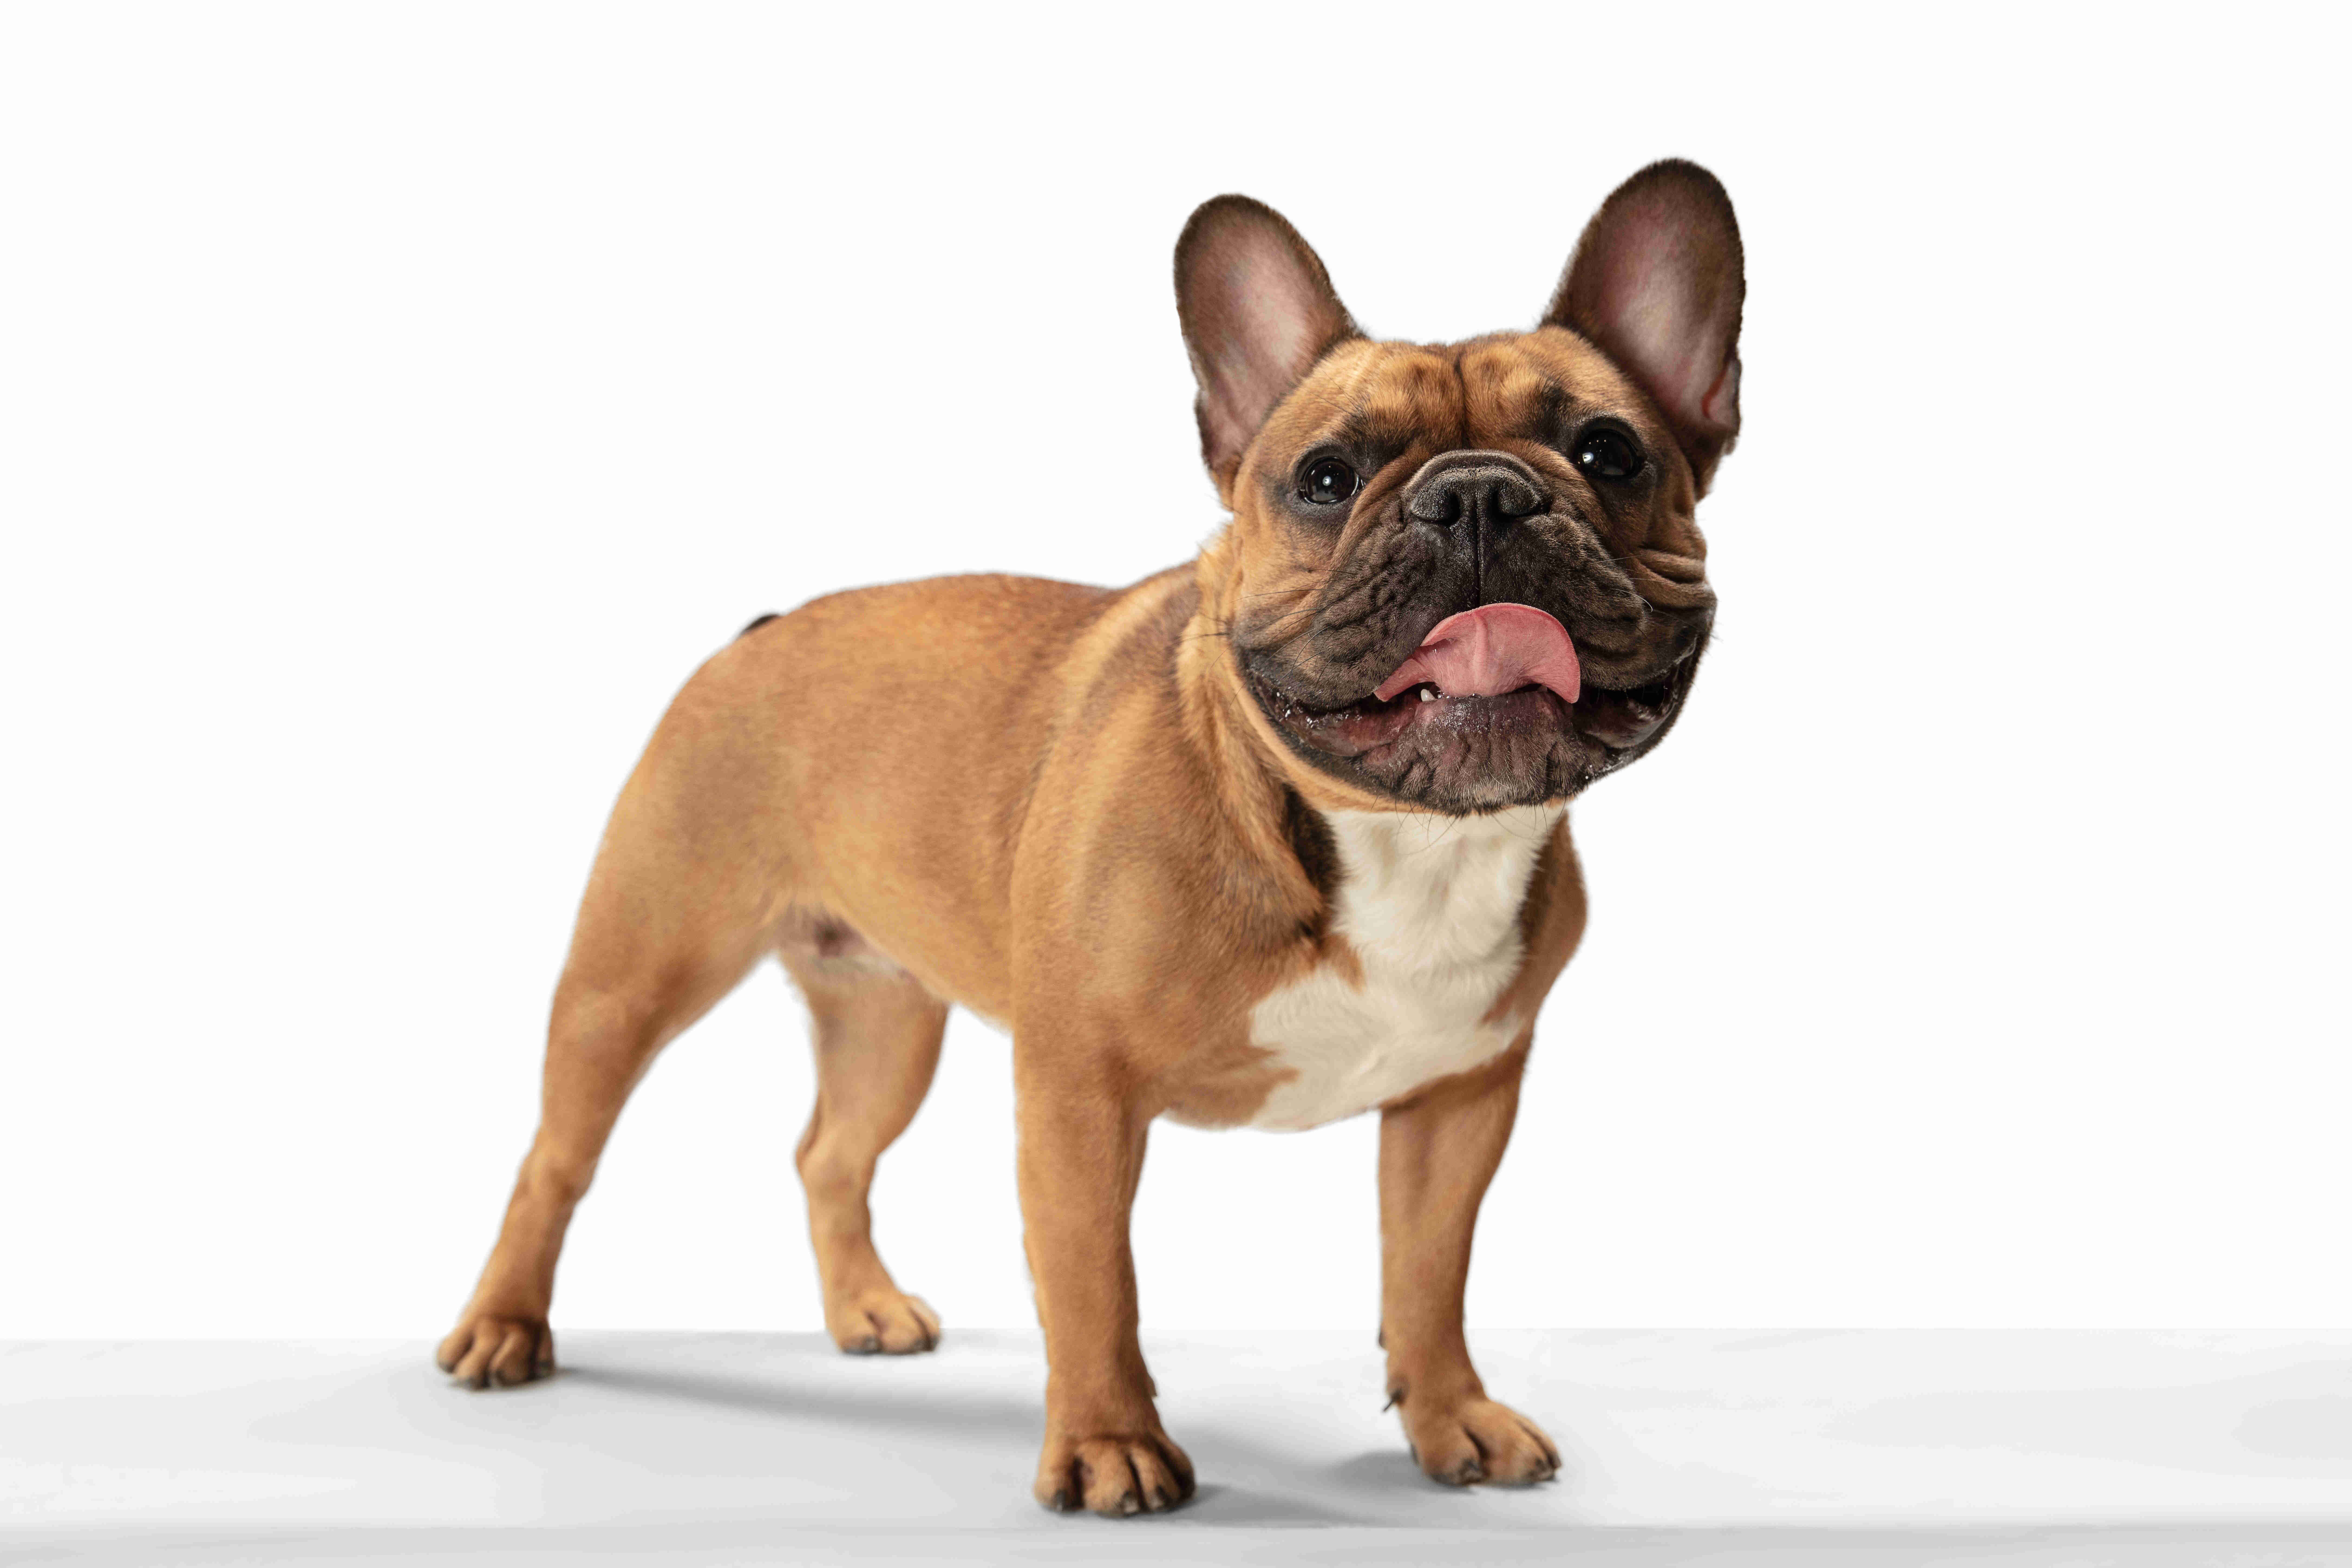 10 Effective Ways to Teach Your French Bulldog Puppy to Stay Calm During Bath Time